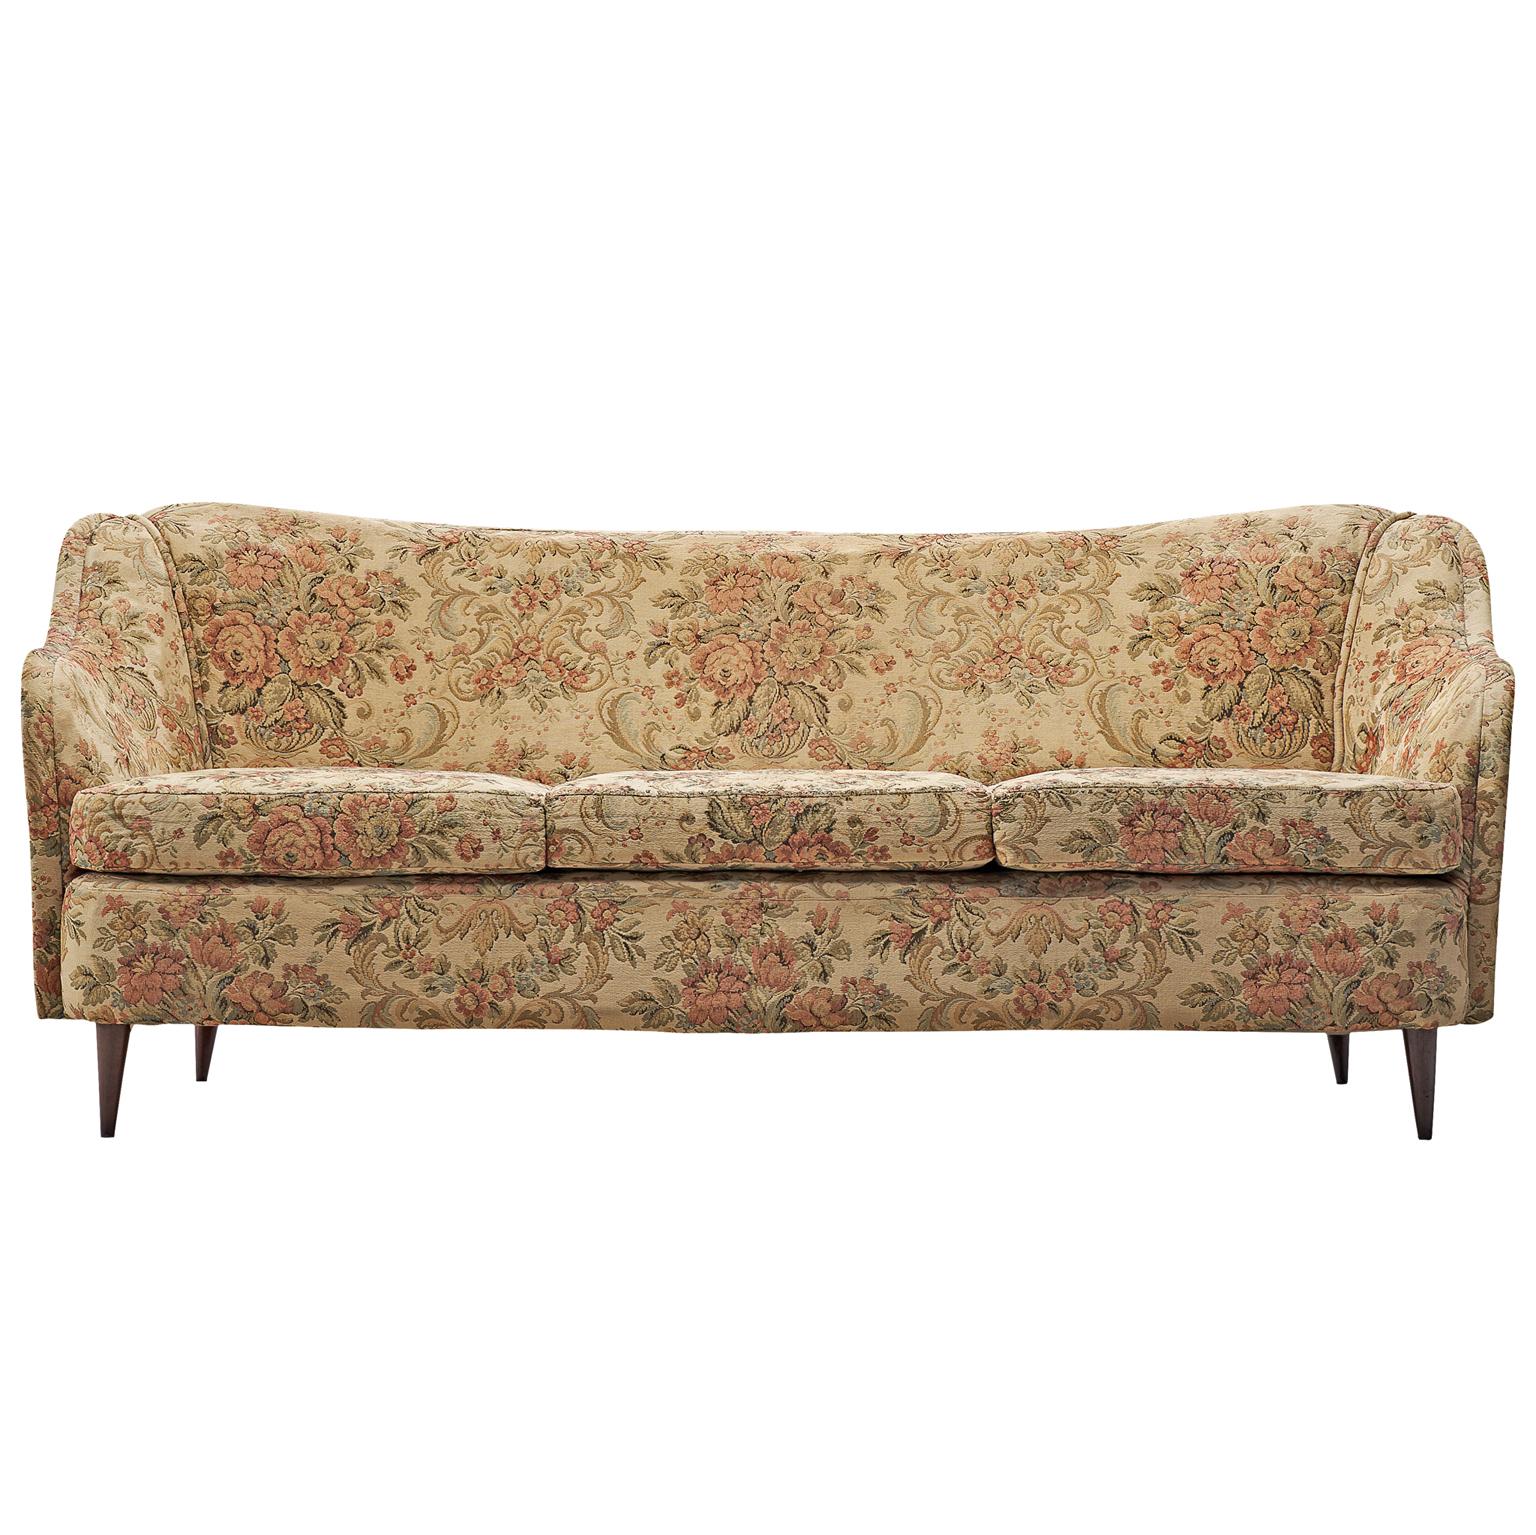 Italian Three-Seat Sofa with Floral Upholstery